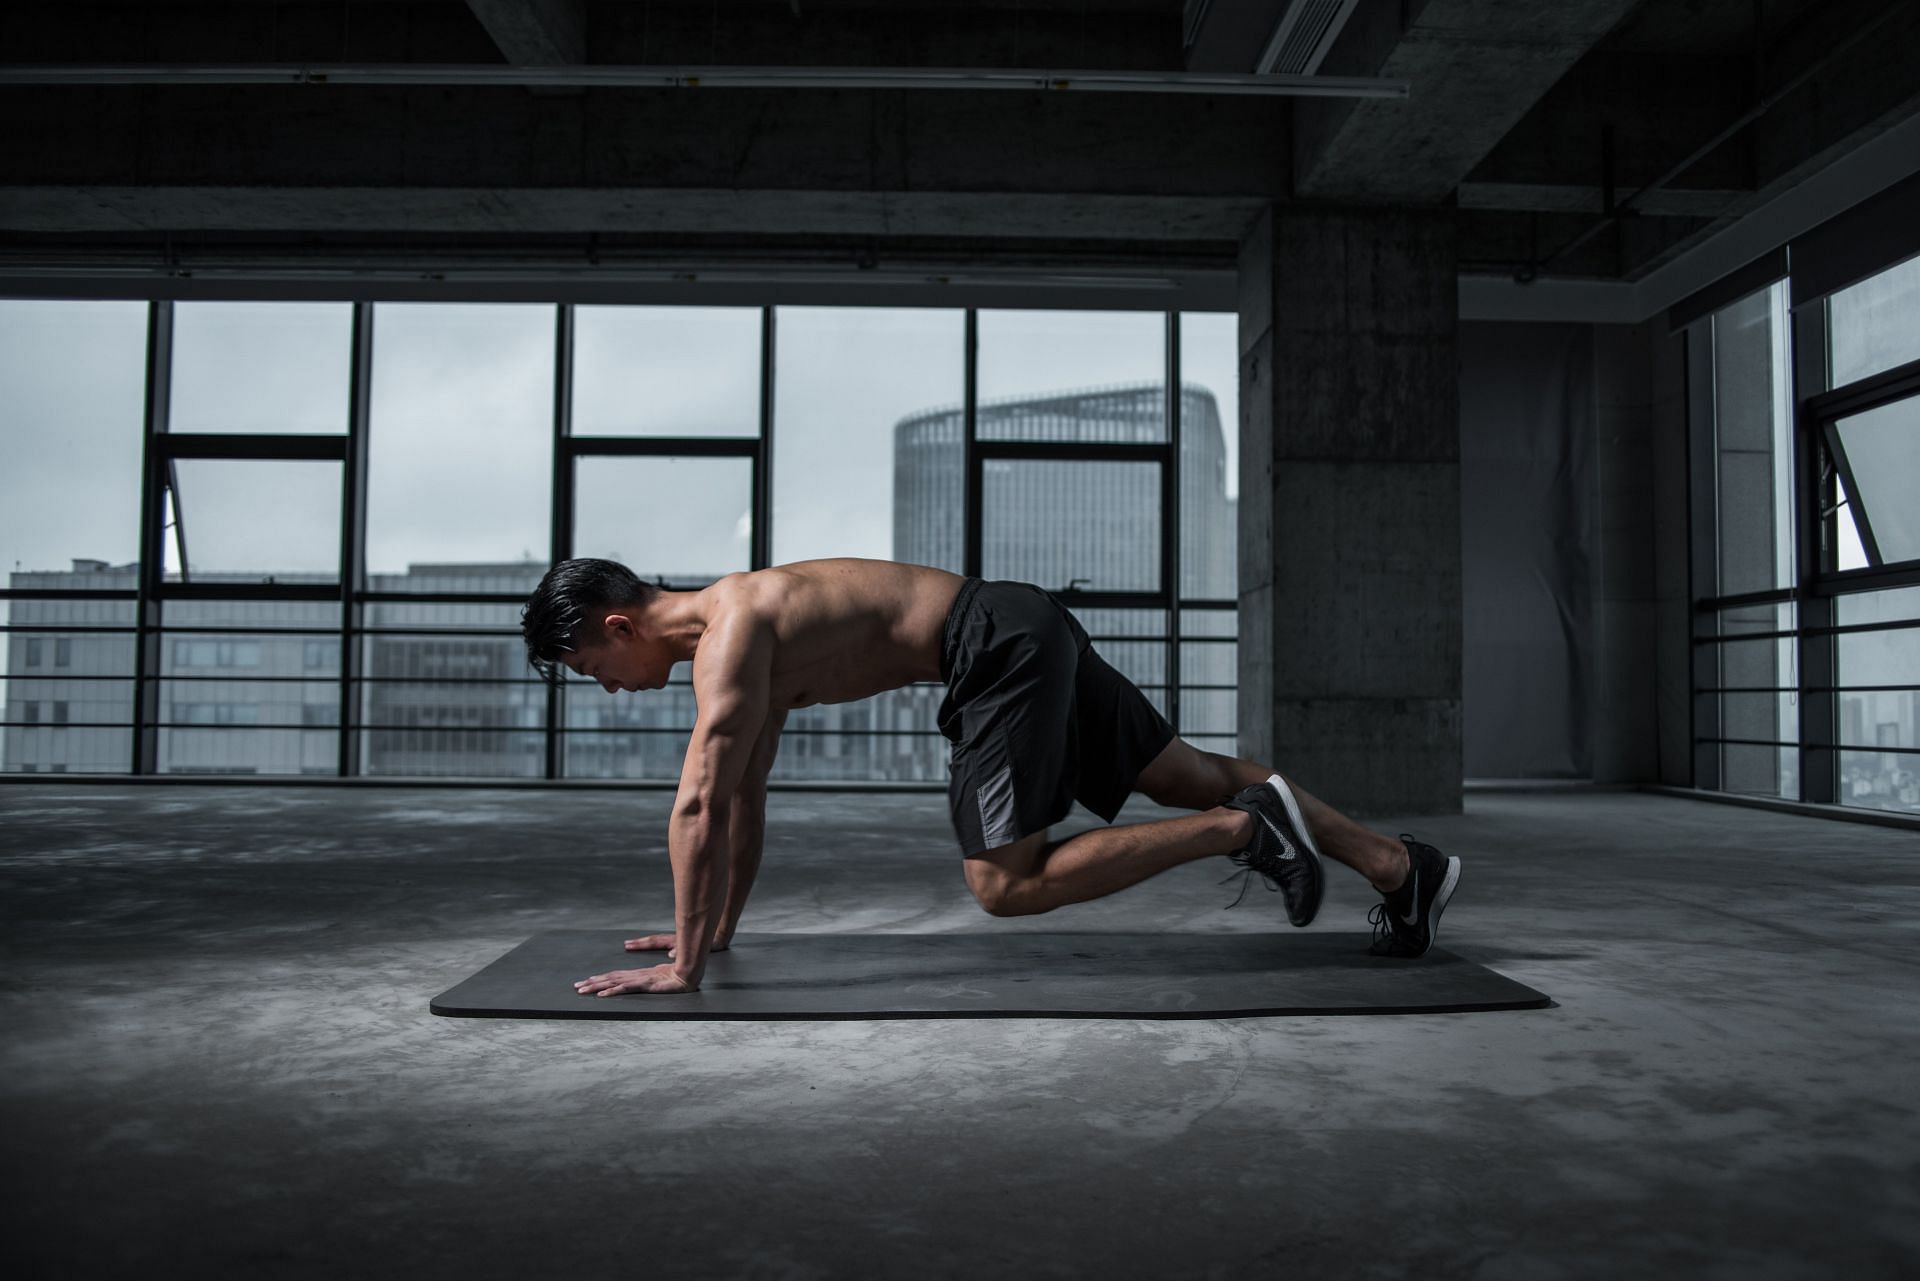 A strong core helps stabilize and control every movement of the body. (Image via Pexels/Li Sun)